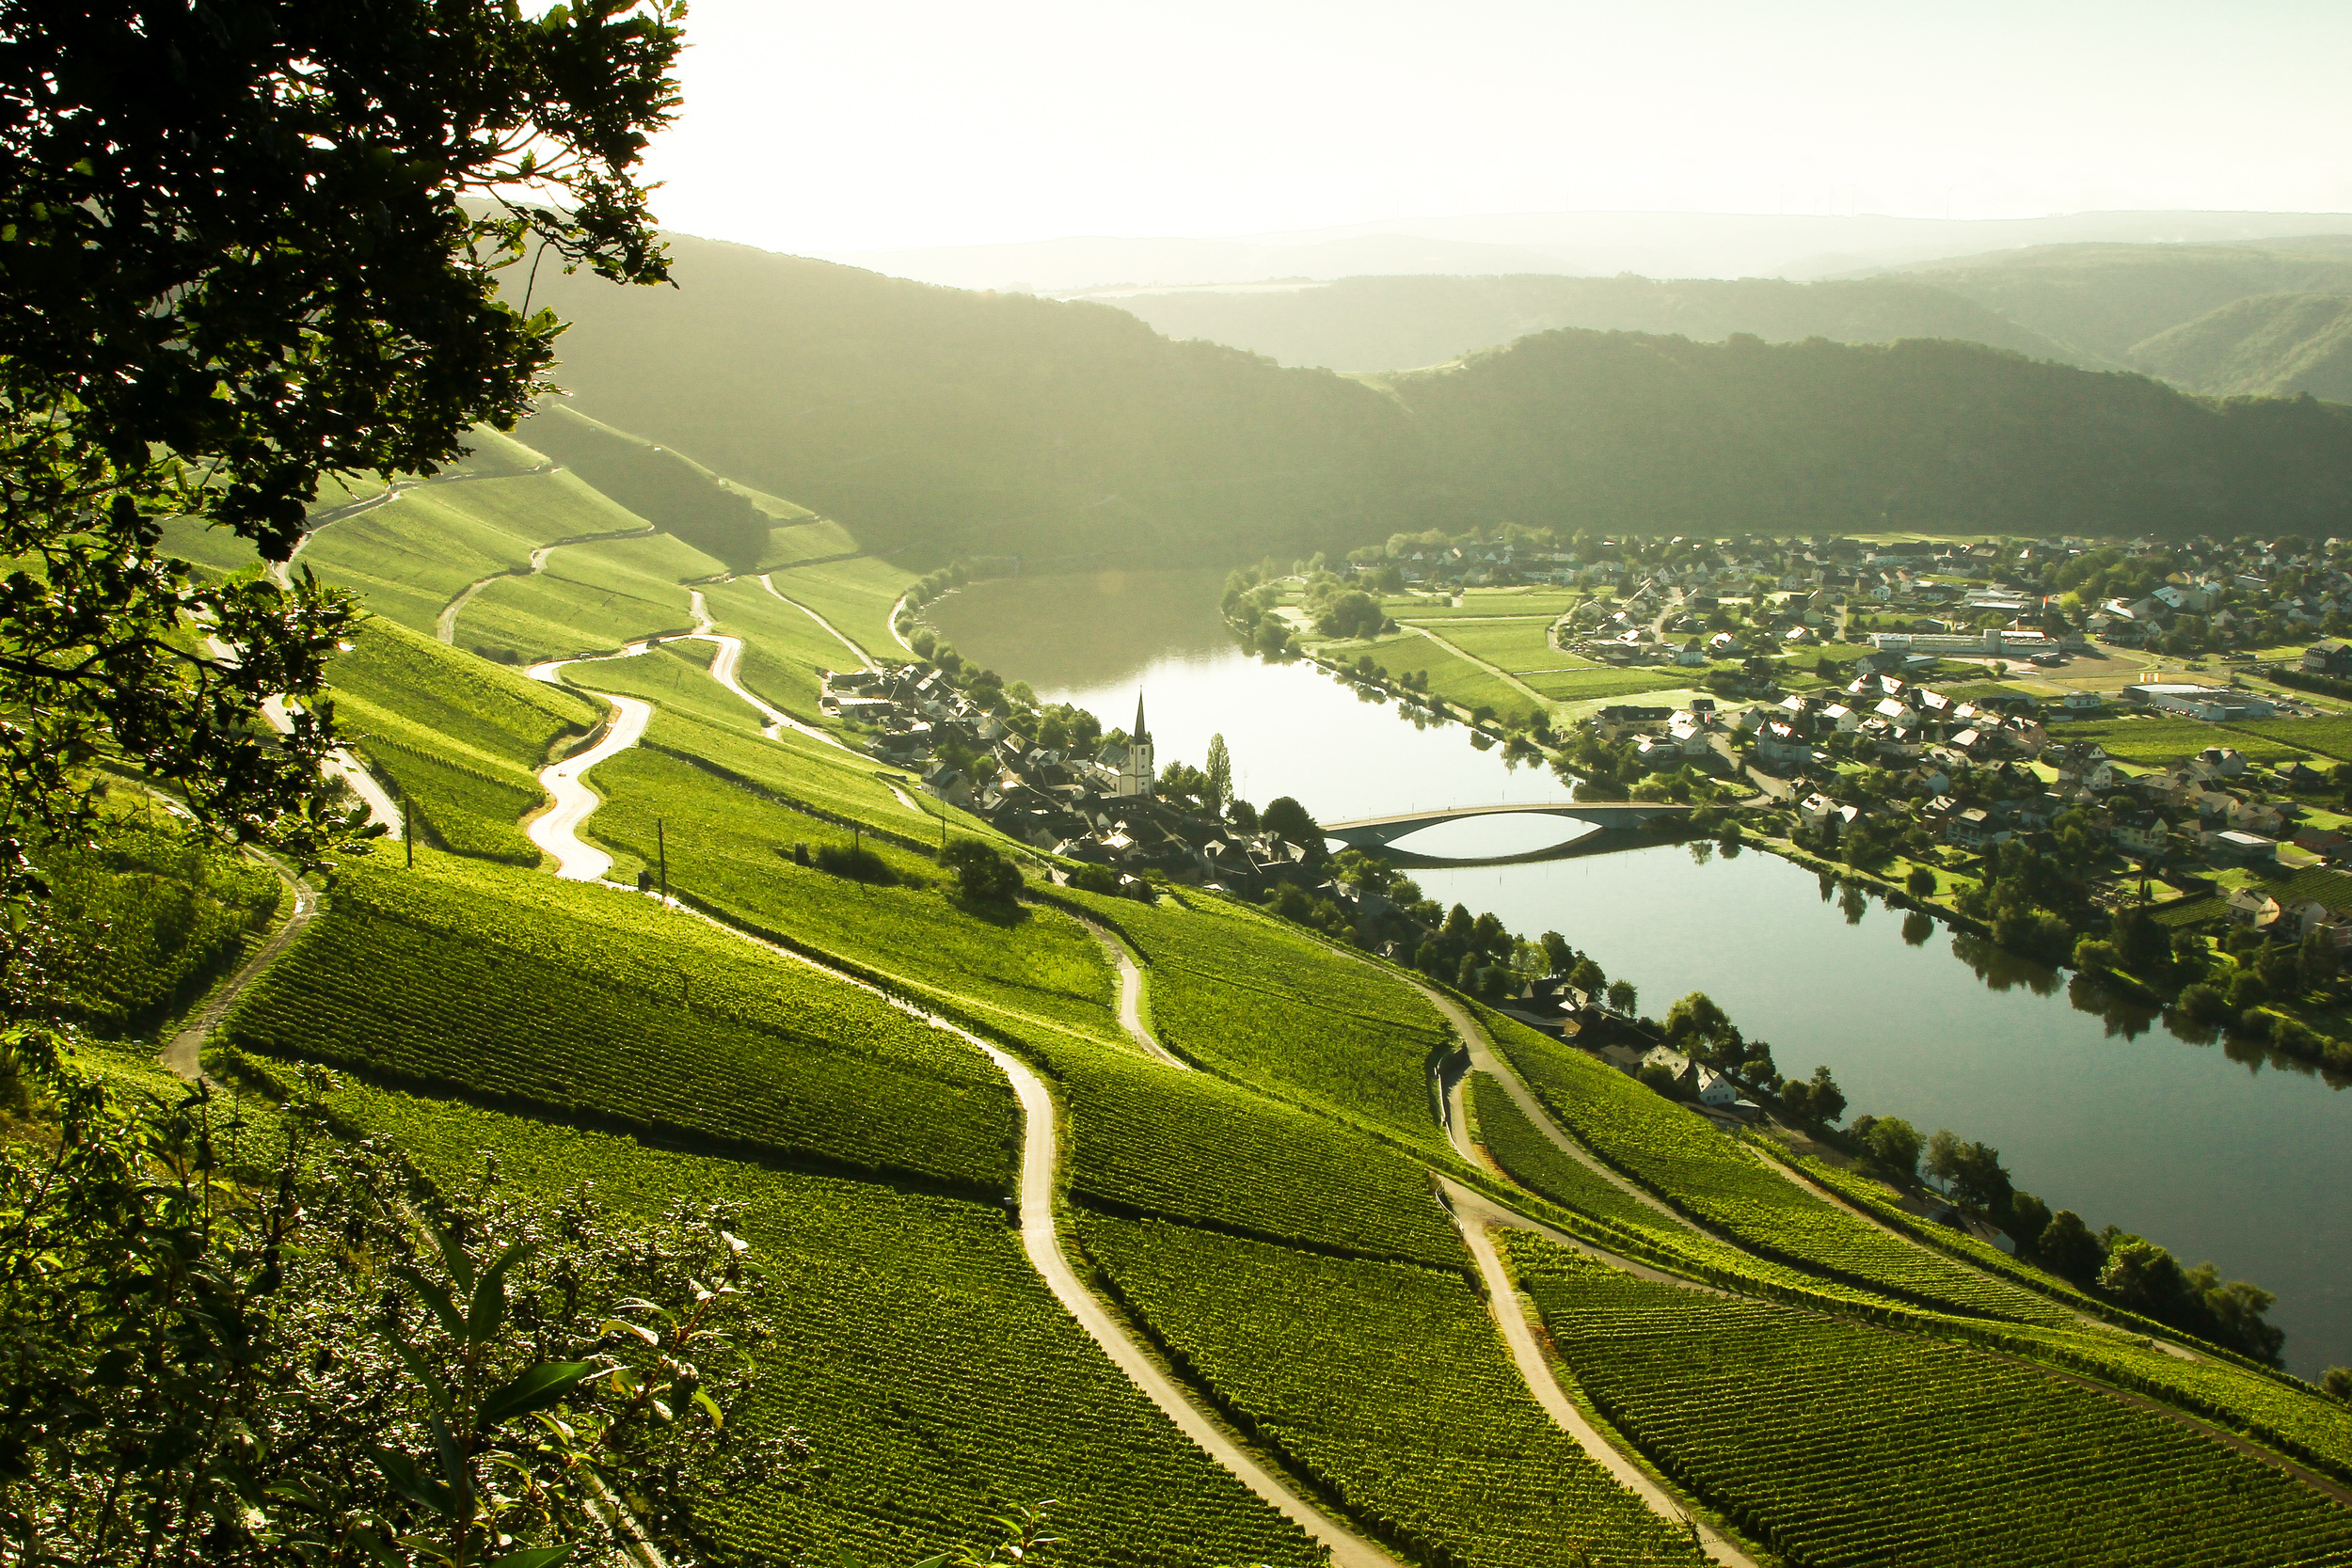 <p>An underrated wine region in Europe that stretches from Luxembourg to Germany. You can sample grapes (mostly whites, including award-winning Riesling) among medieval castles, beautiful river views, and terraced vineyards, or book a tasting cruise along the Mosel River. Even the drive or train ride there is memorable, as you’ll journey between sides of a canyon covered in impressive ancient fortresses and wineries.</p><p><a href='https://www.msn.com/en-us/community/channel/vid-cj9pqbr0vn9in2b6ddcd8sfgpfq6x6utp44fssrv6mc2gtybw0us'>Follow us on MSN to see more of our exclusive lifestyle content.</a></p>